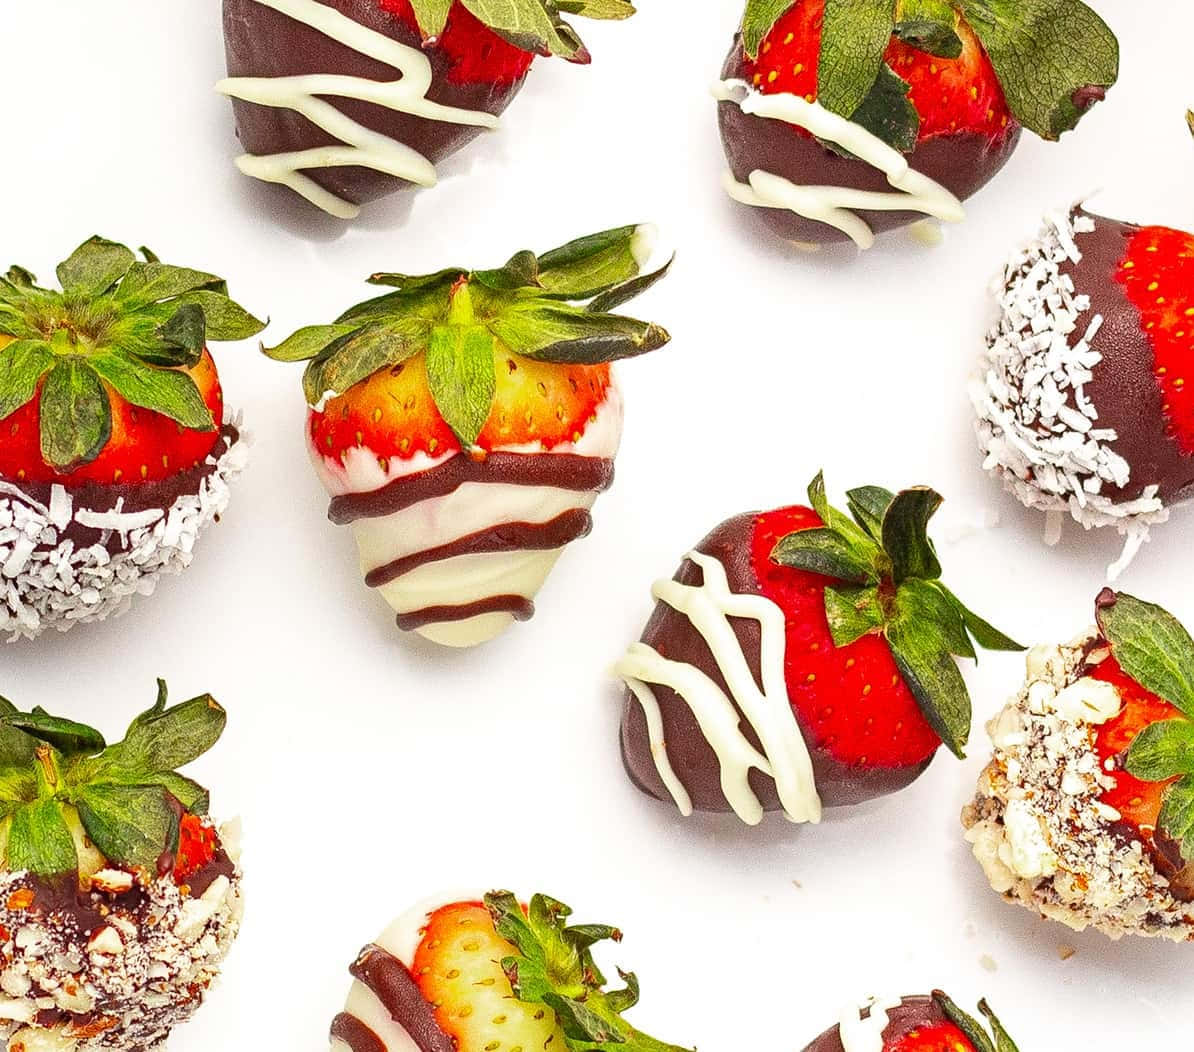 White And Brown Chocolate Dipped Strawberries Background